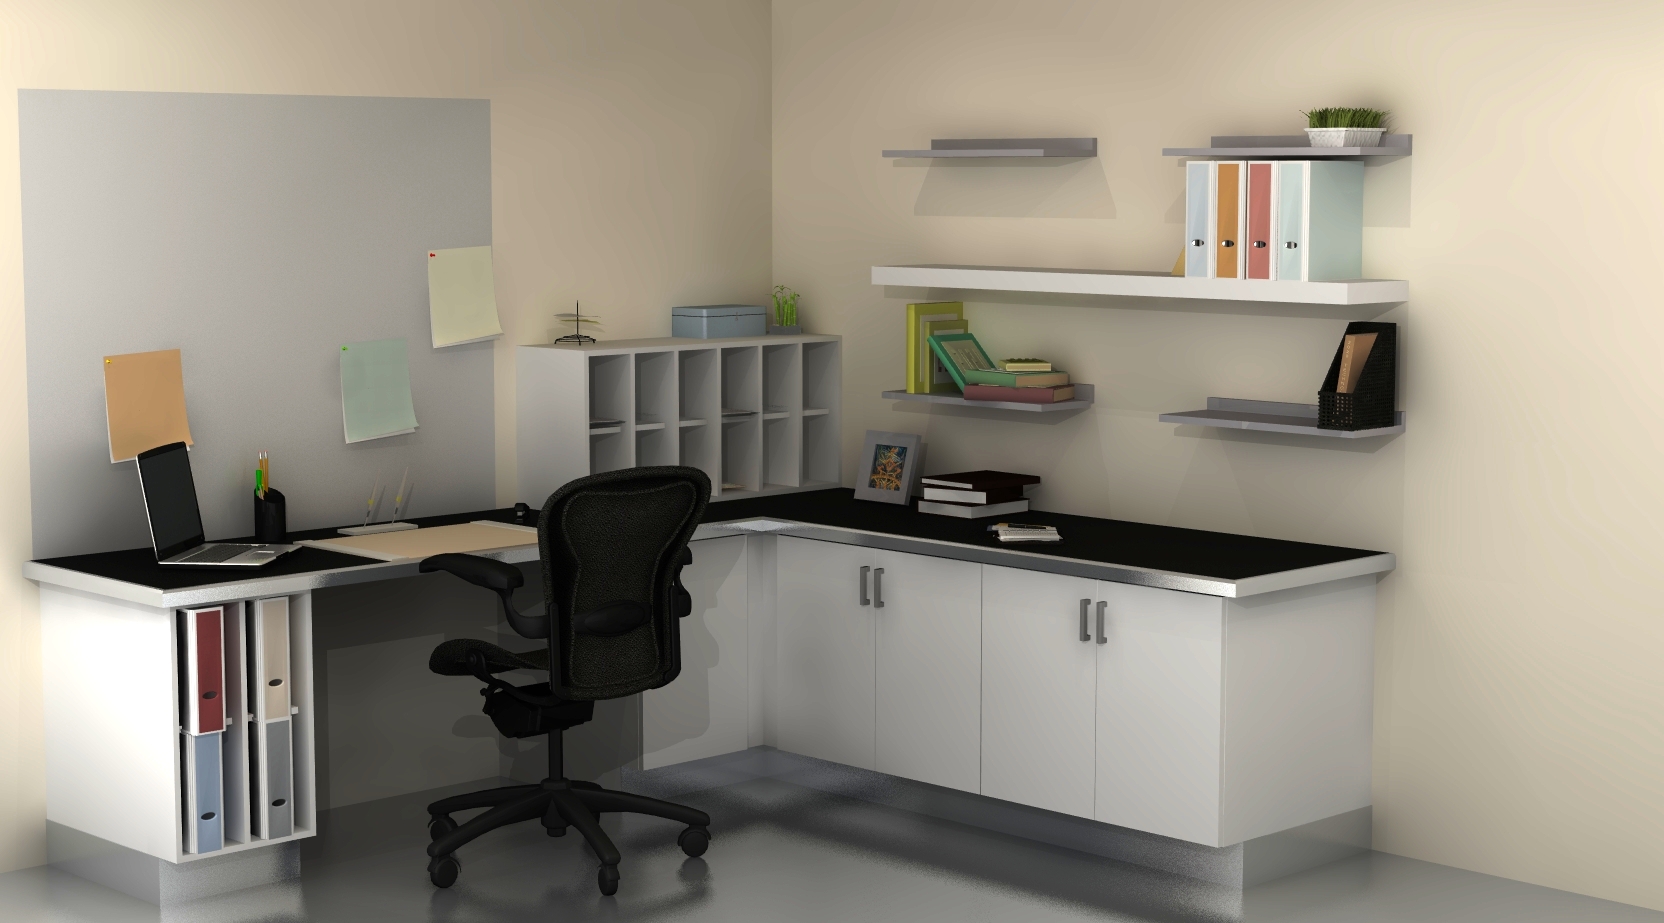 Useful Spaces A Home Office With Ikea Cabinets